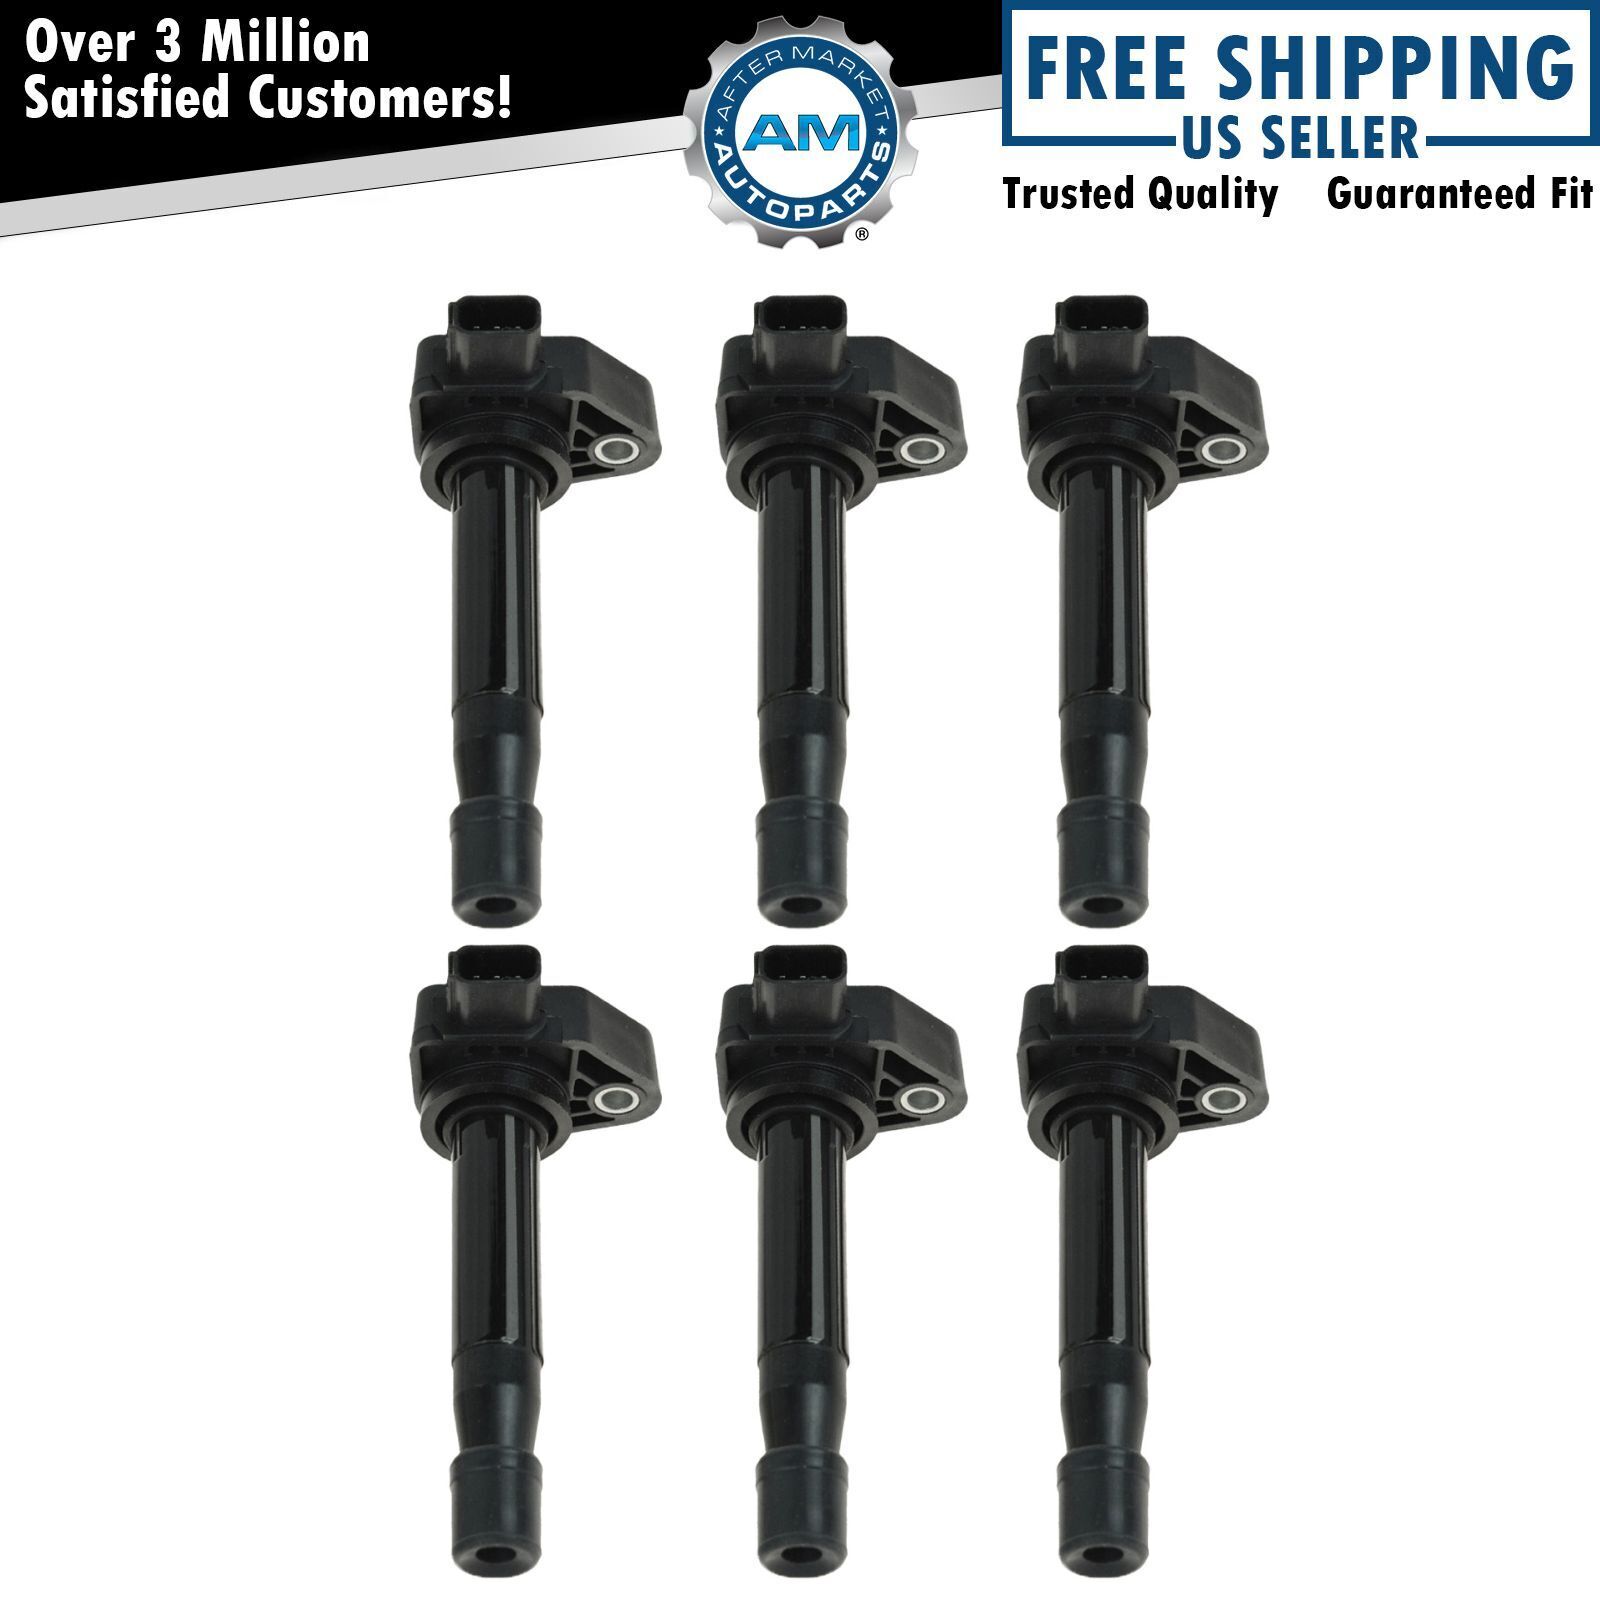 Ignition Coil Pack Kit Set of 6 For Honda Accord Odyssey Acura CL RL TL 3.2TL V6